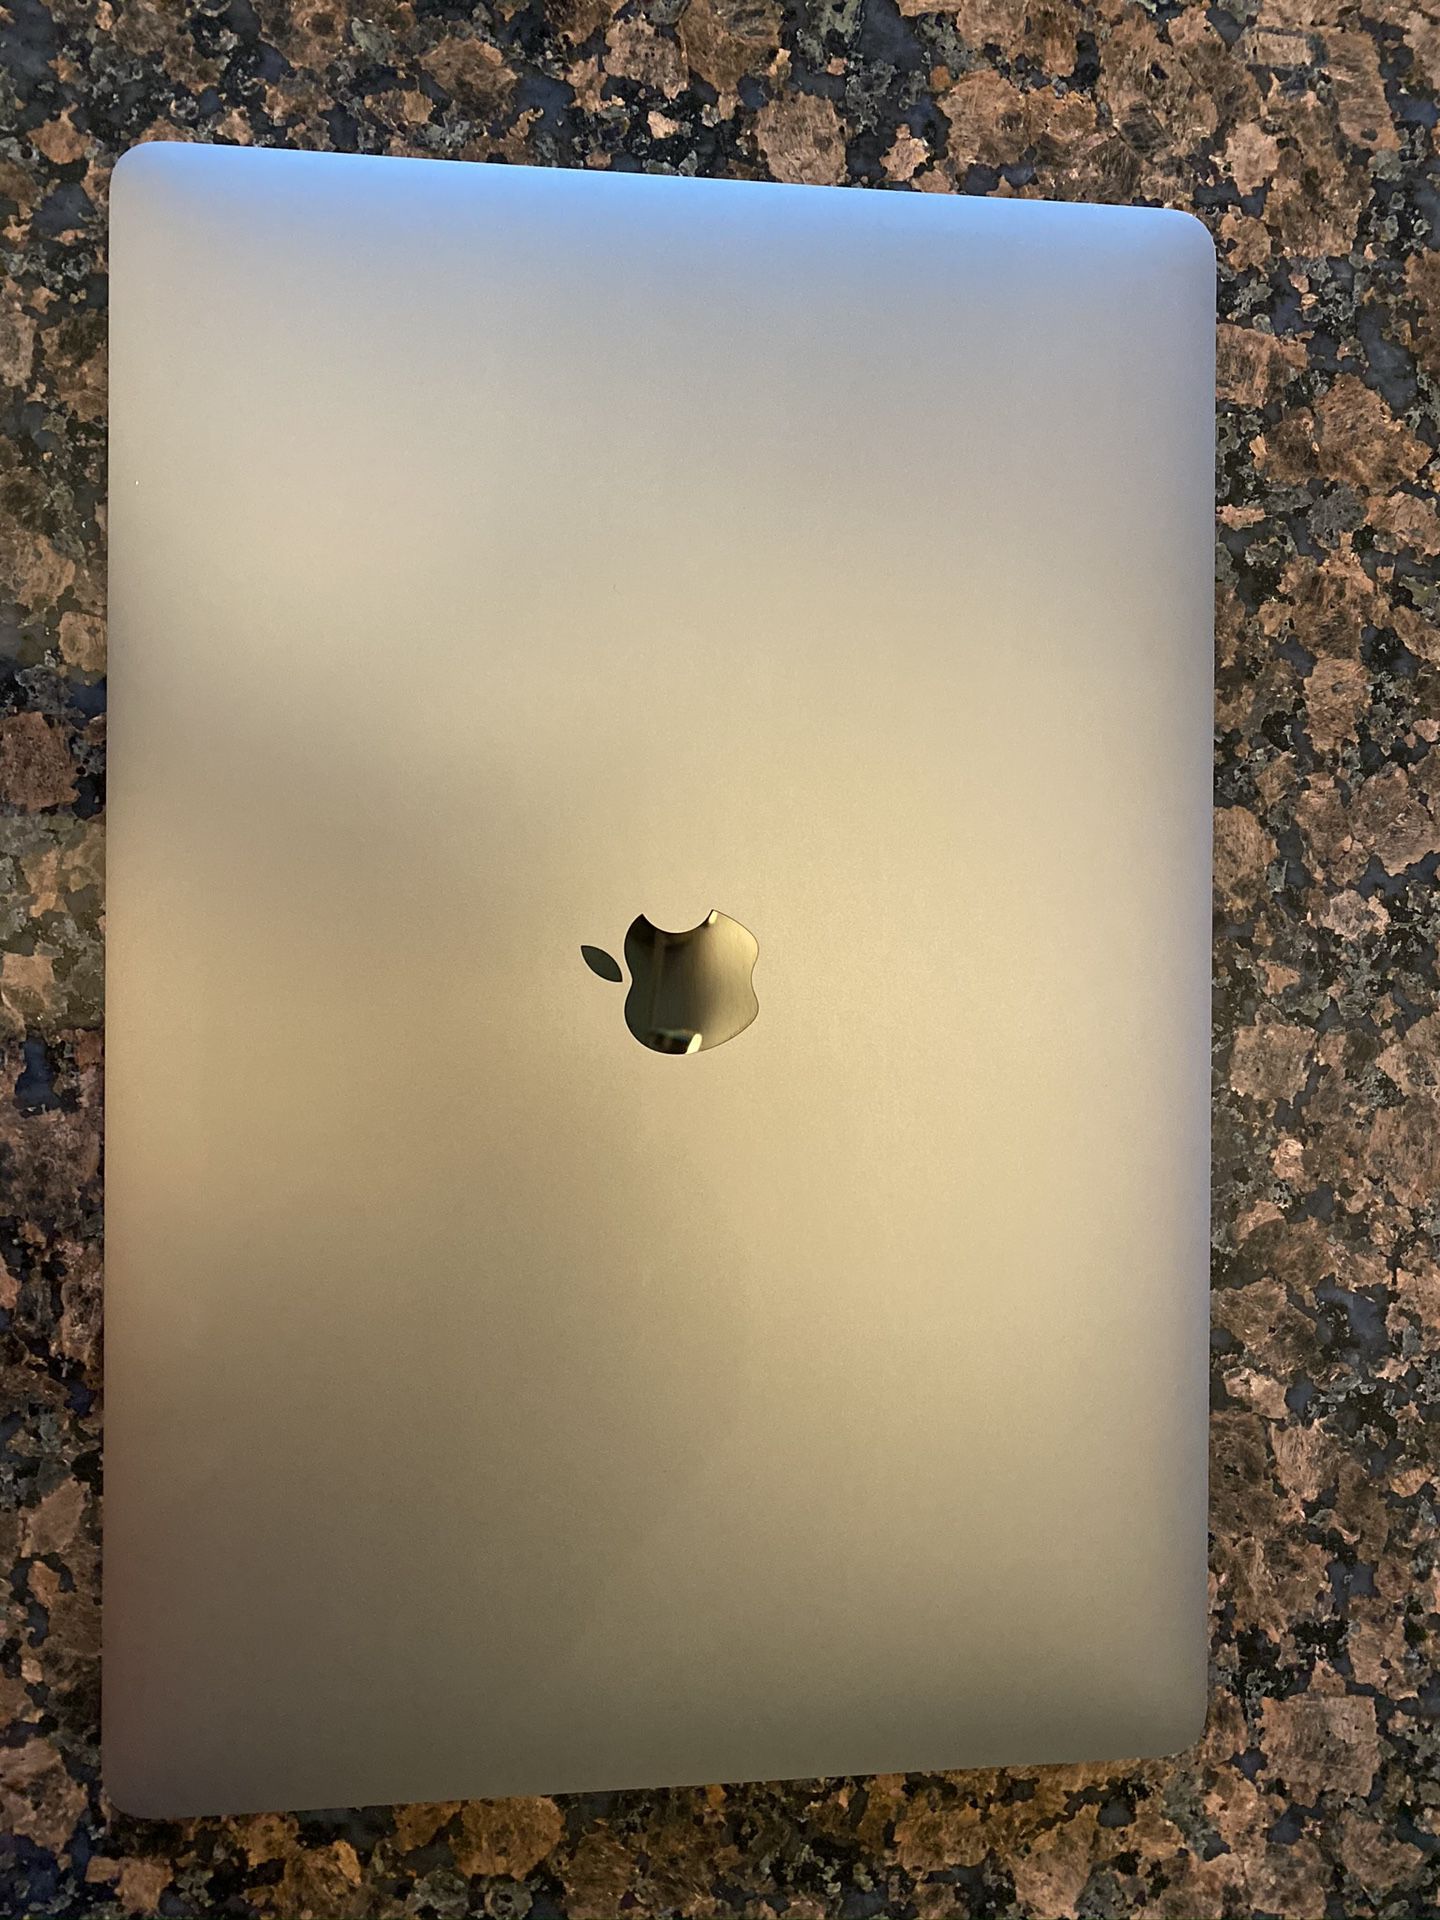 2017 MacBook Pro 15 inch with AppleCare plus